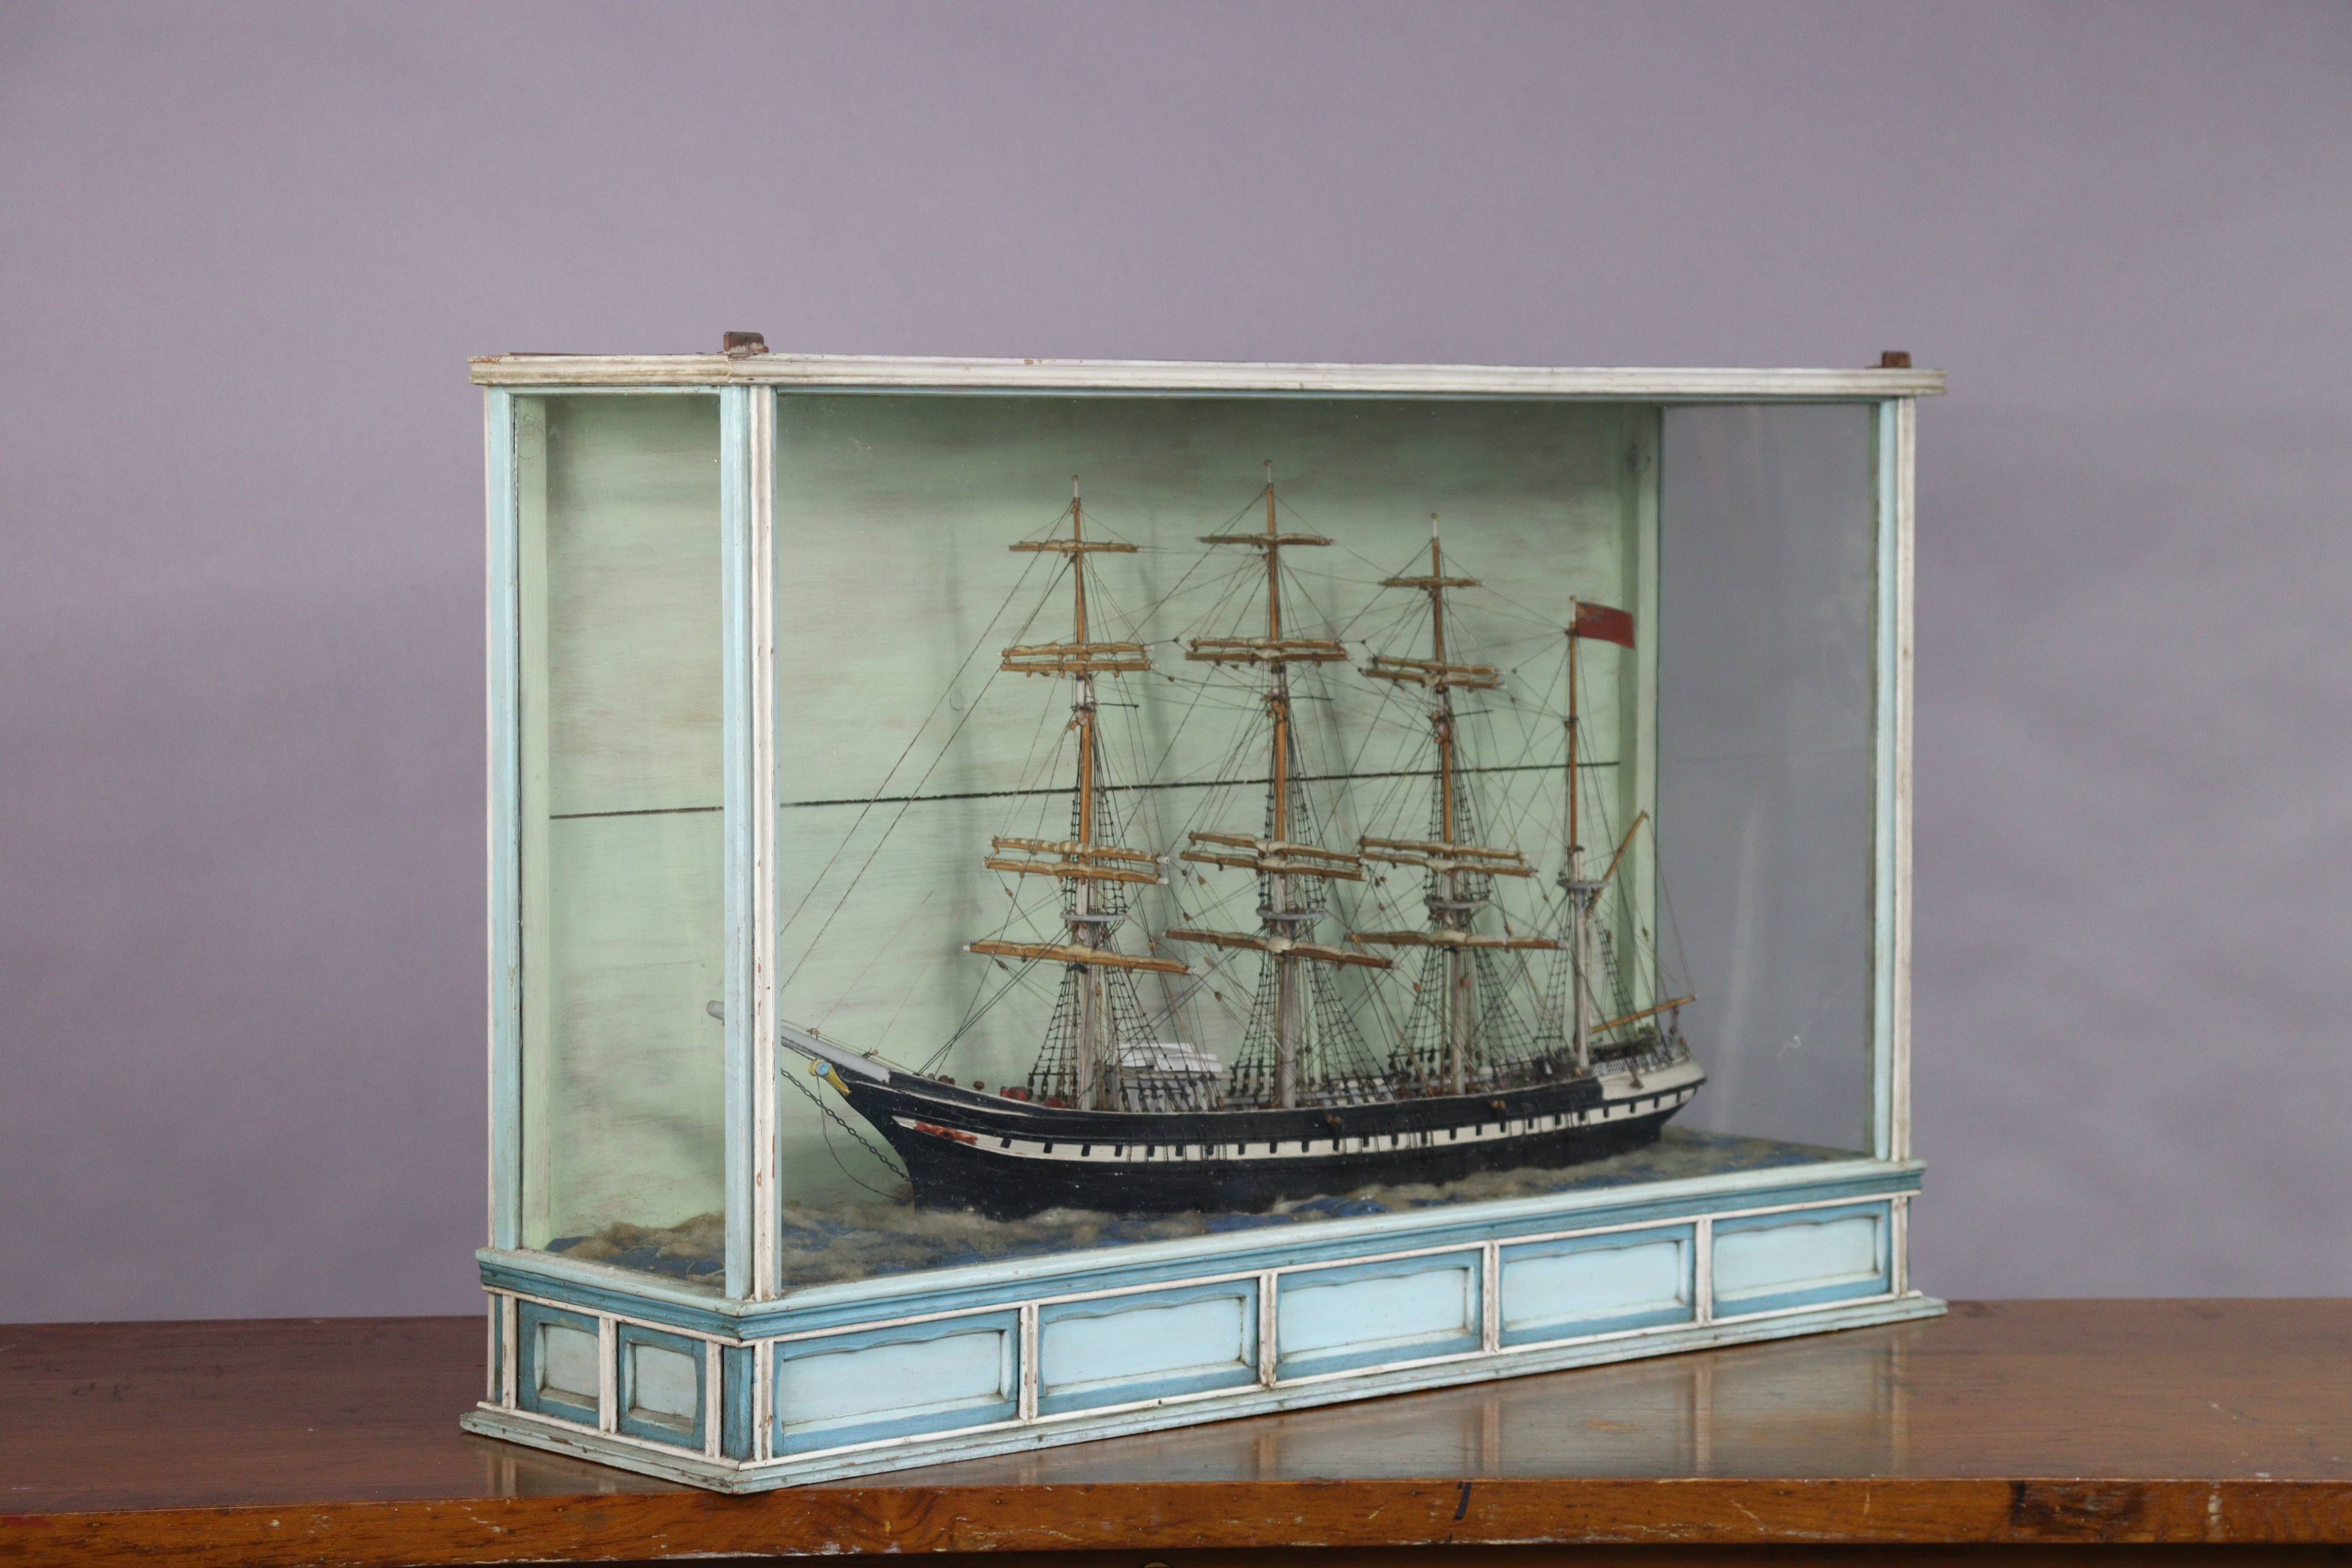 A late 19th/early 20th century DISPLAY OF A PAINTED WOODEN BRITISH SAILING VESSEL BUILT BY JOSEPH - Image 2 of 10